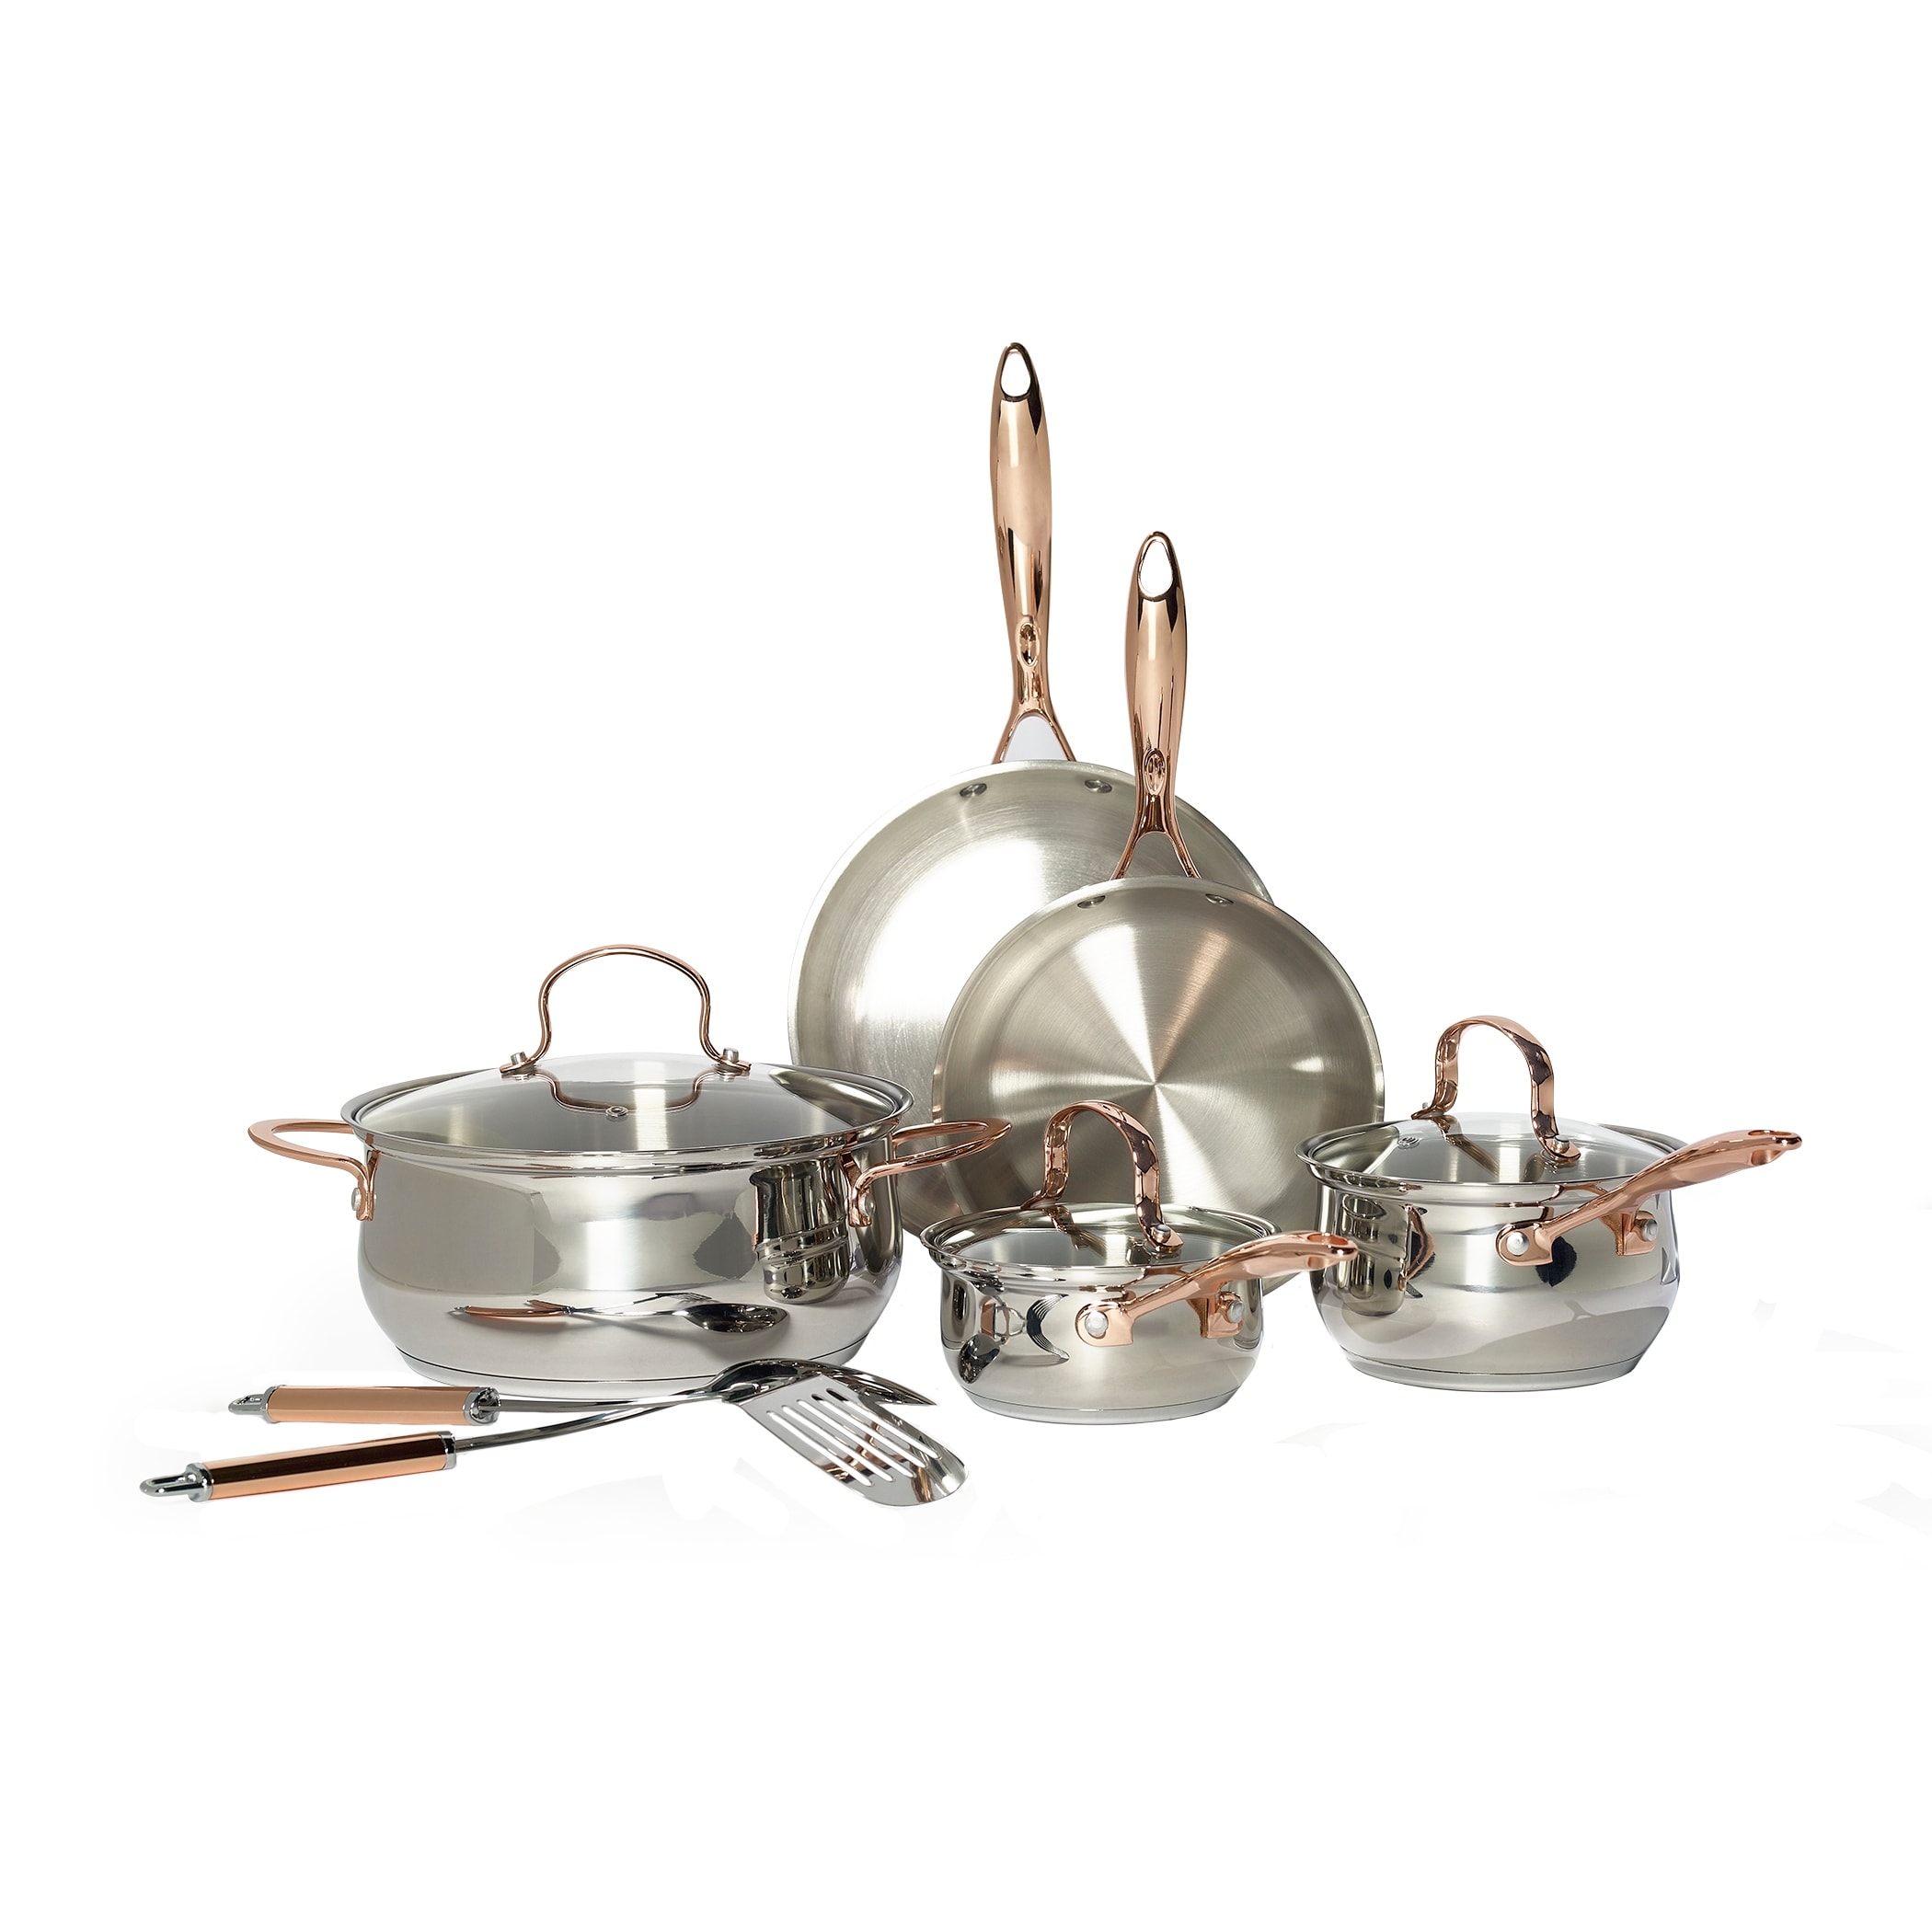 https://ak1.ostkcdn.com/images/products/is/images/direct/713410ed04f591c80fbe239dd3e3f26e412edb45/Denmark-10PC-Stainless-Steel-Cookware-Set.jpg